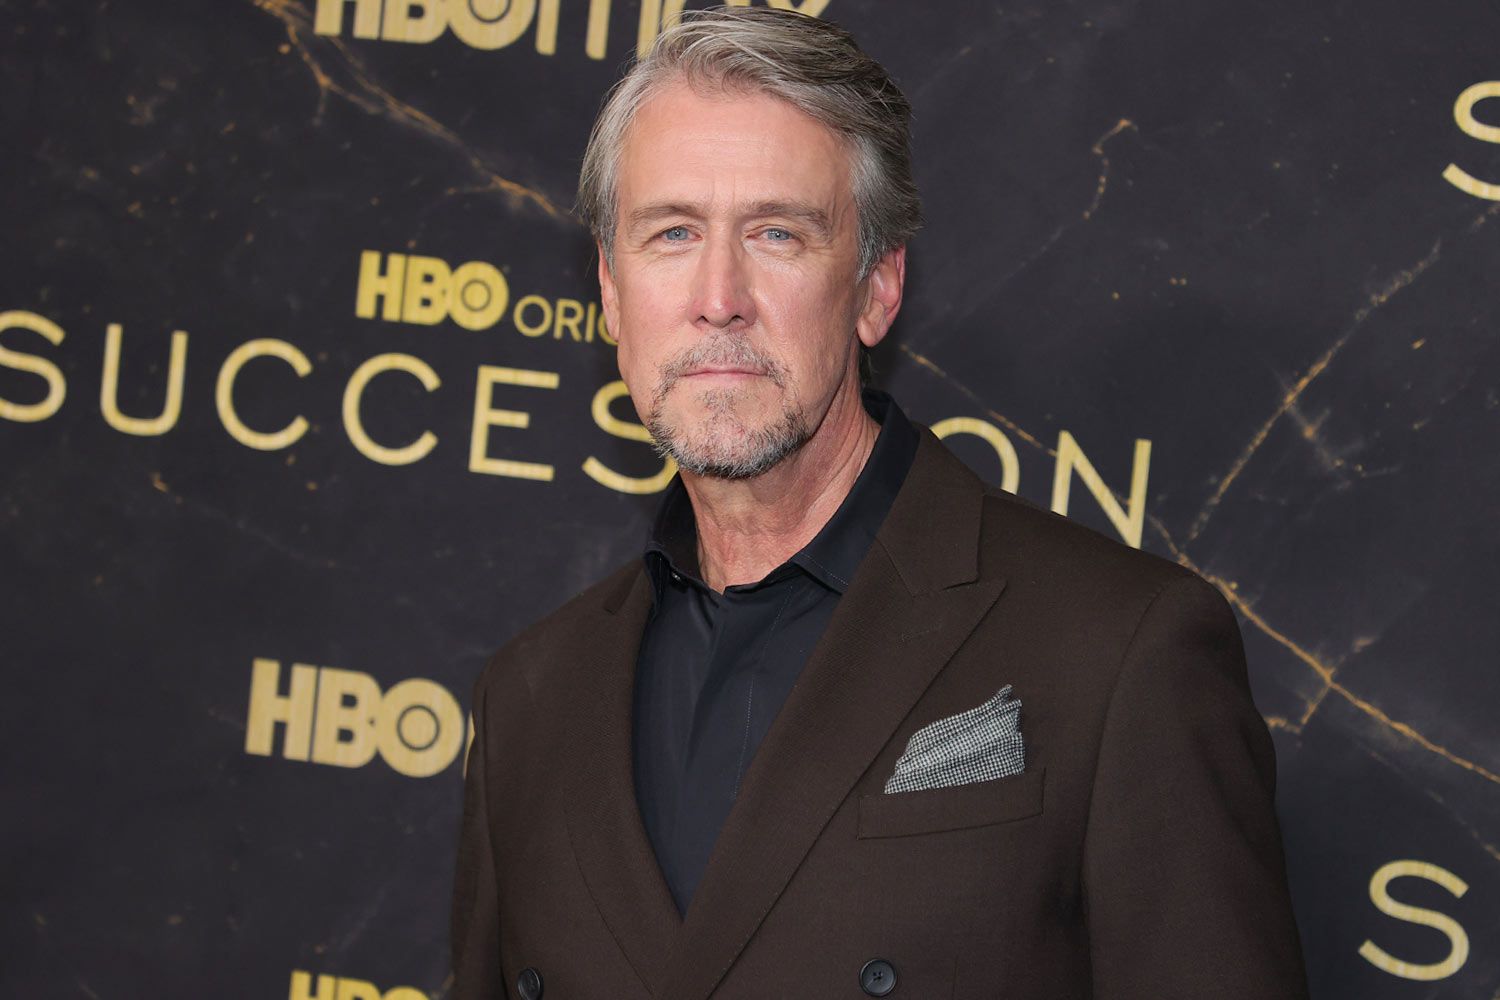 Alan Ruck’s Car Crash Linked To High-Tech Mishap With Police